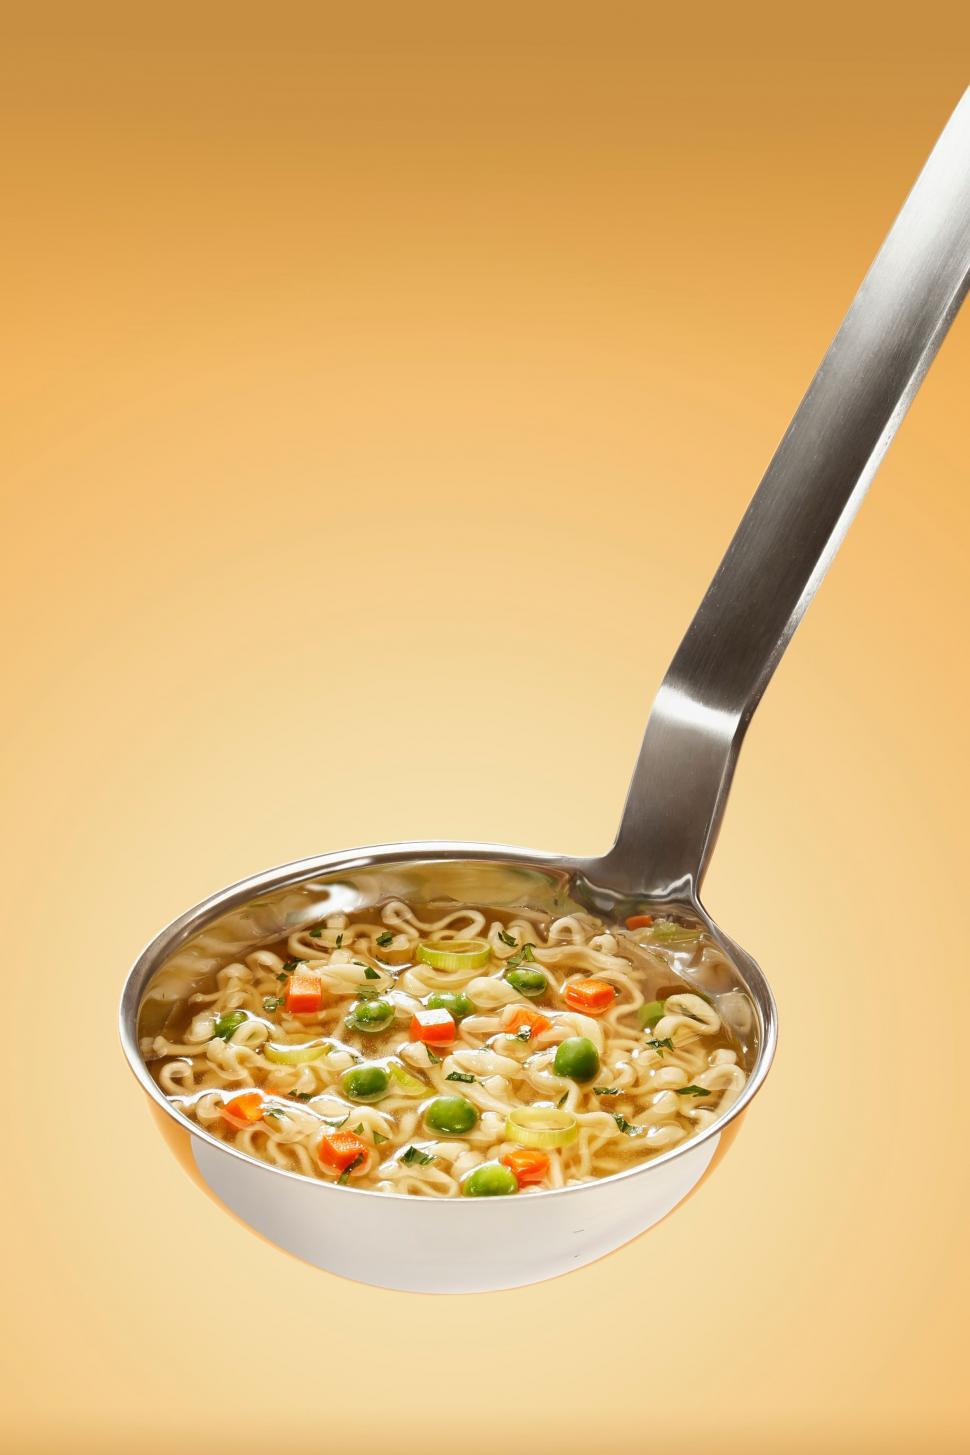 Free Image of Pan of Soup With Spoon 